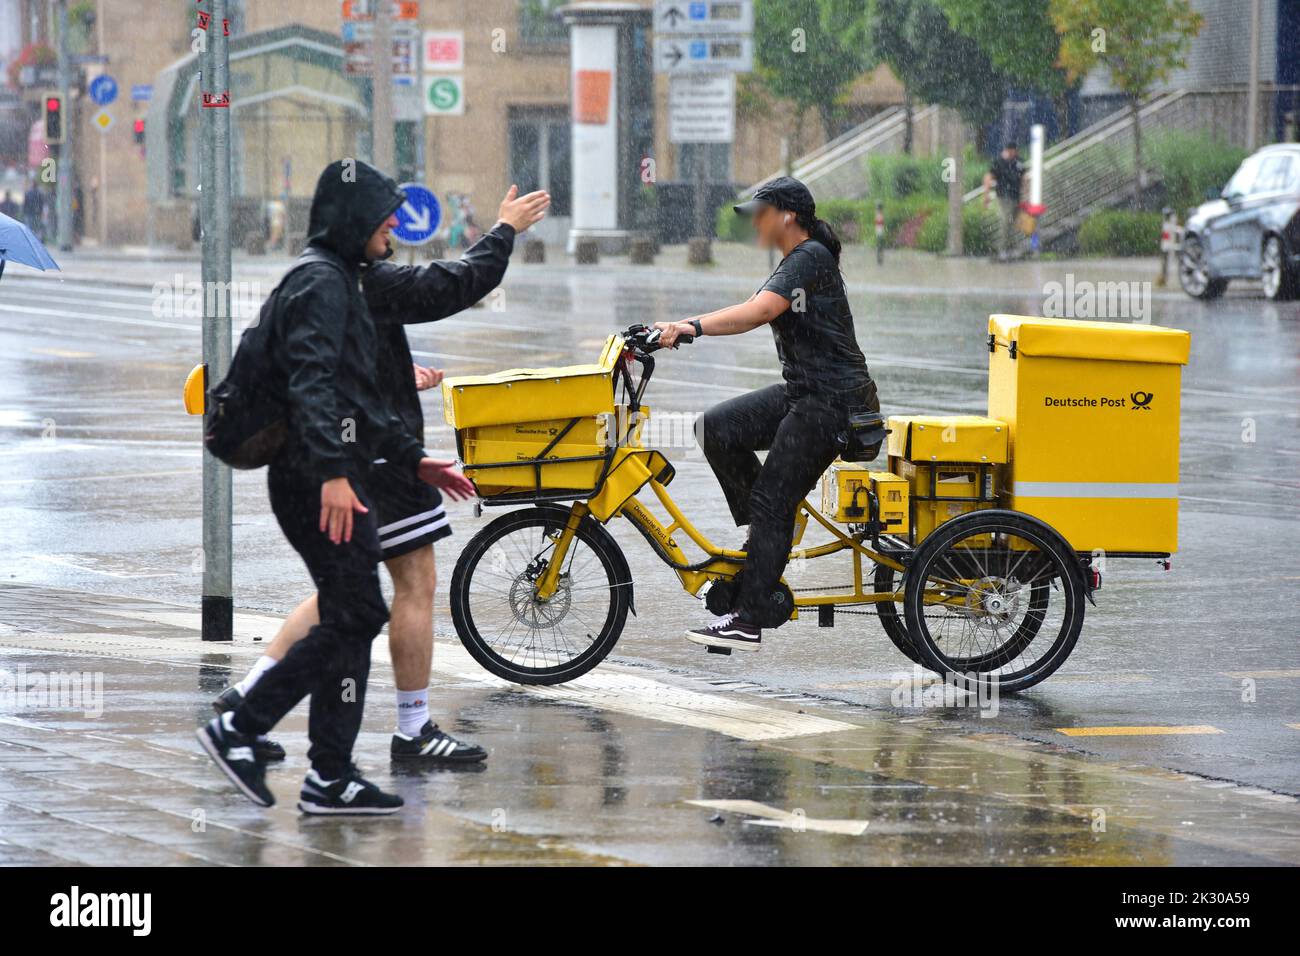 Deutsche Post delivery woman on a bicycle in the rain in the center of Nuremberg Stock Photo